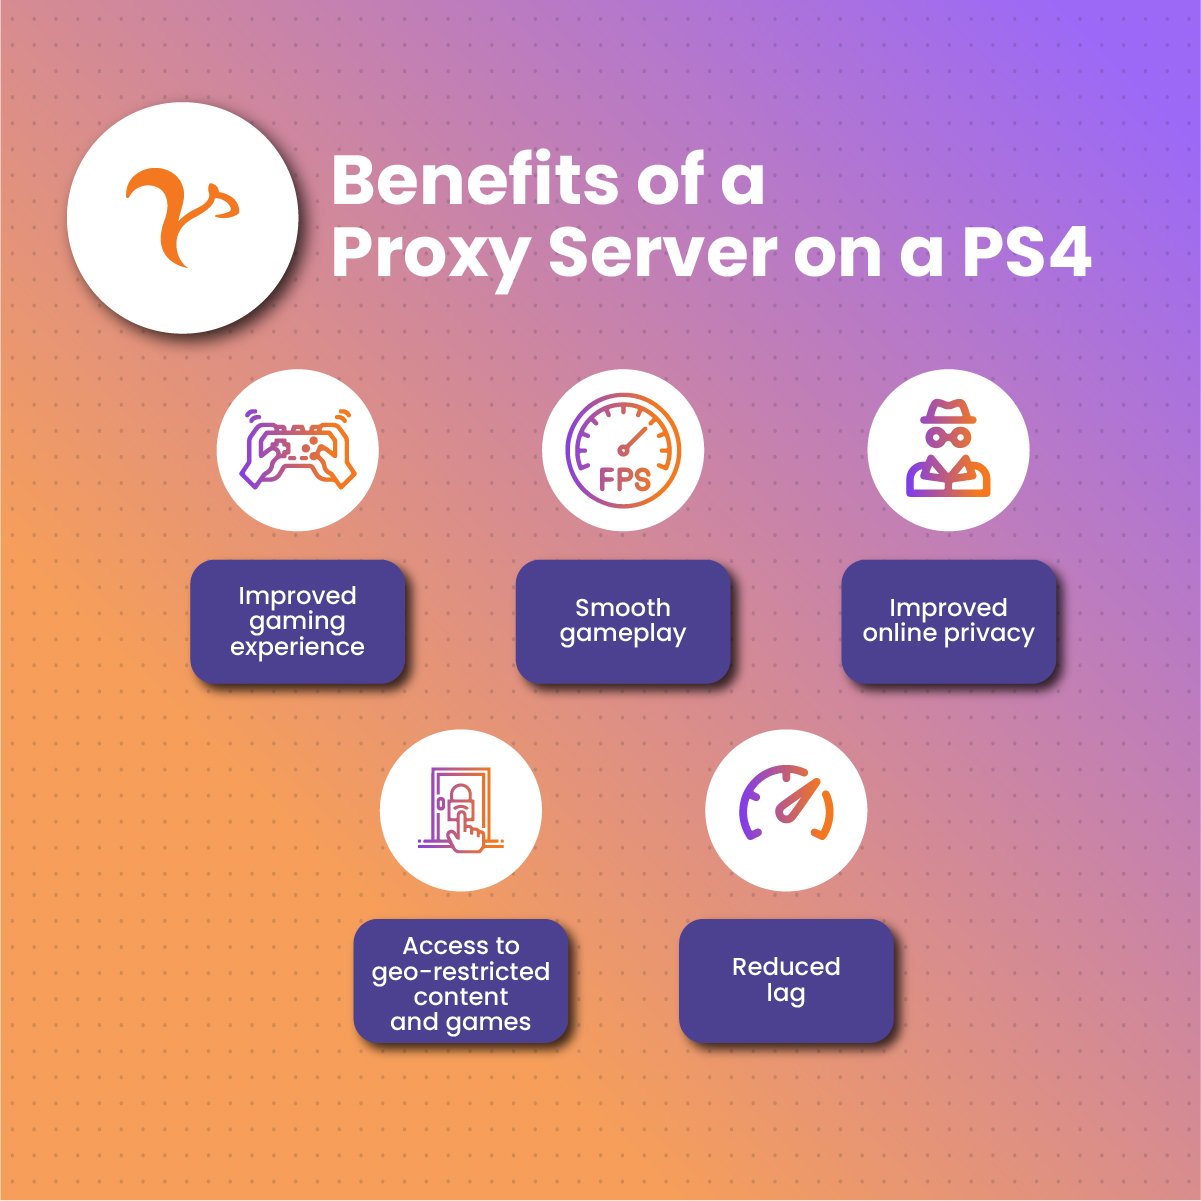 Benefits of a Proxy Server on a PS4